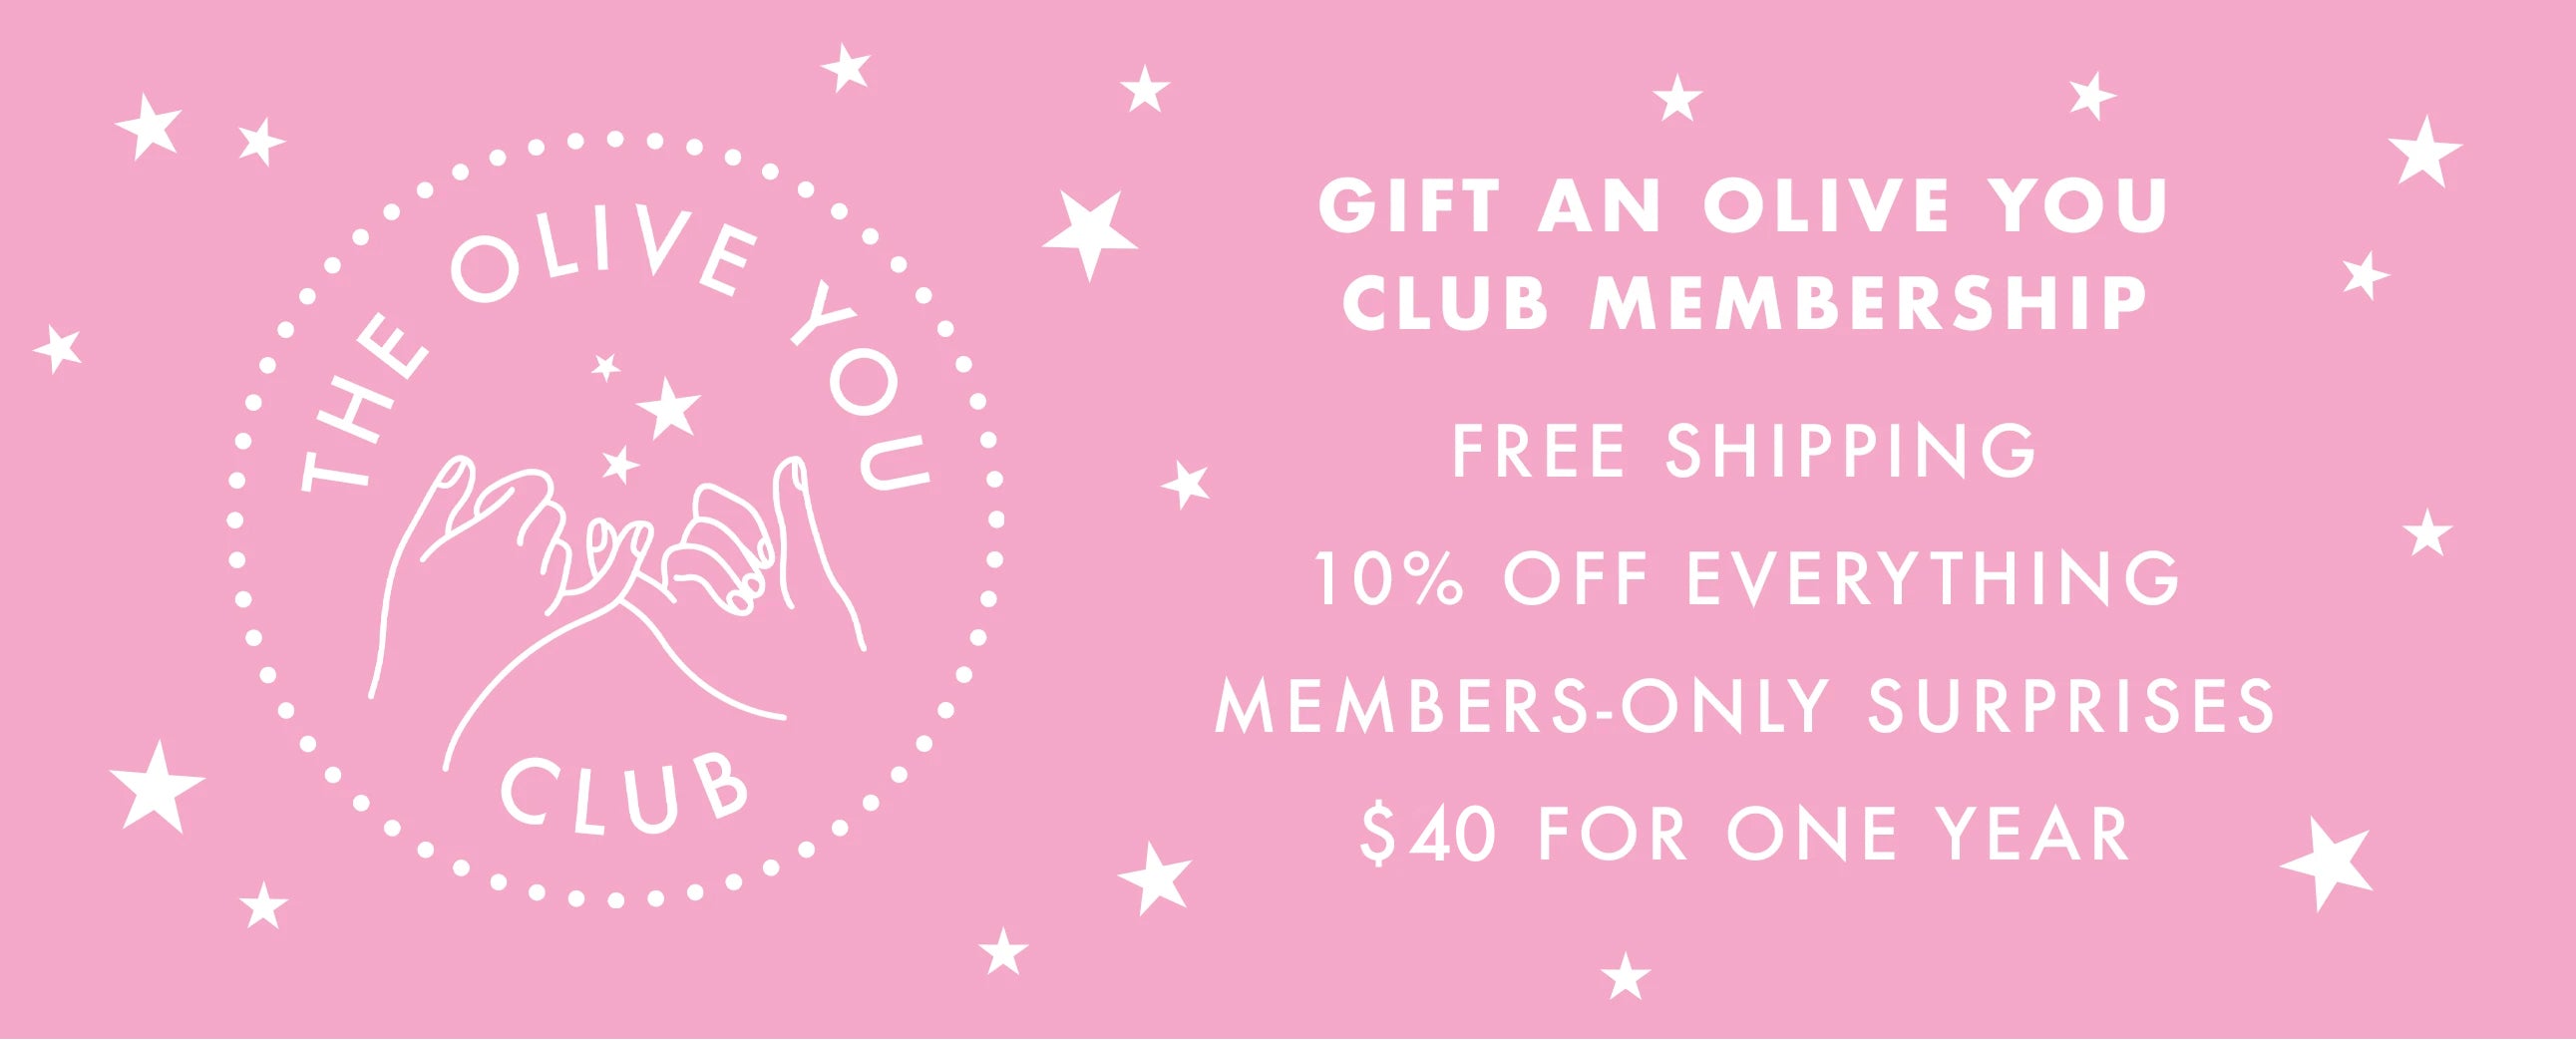 gift the olive you club annual membership free shipping, 10% off everything, members only surprises, $40 per year